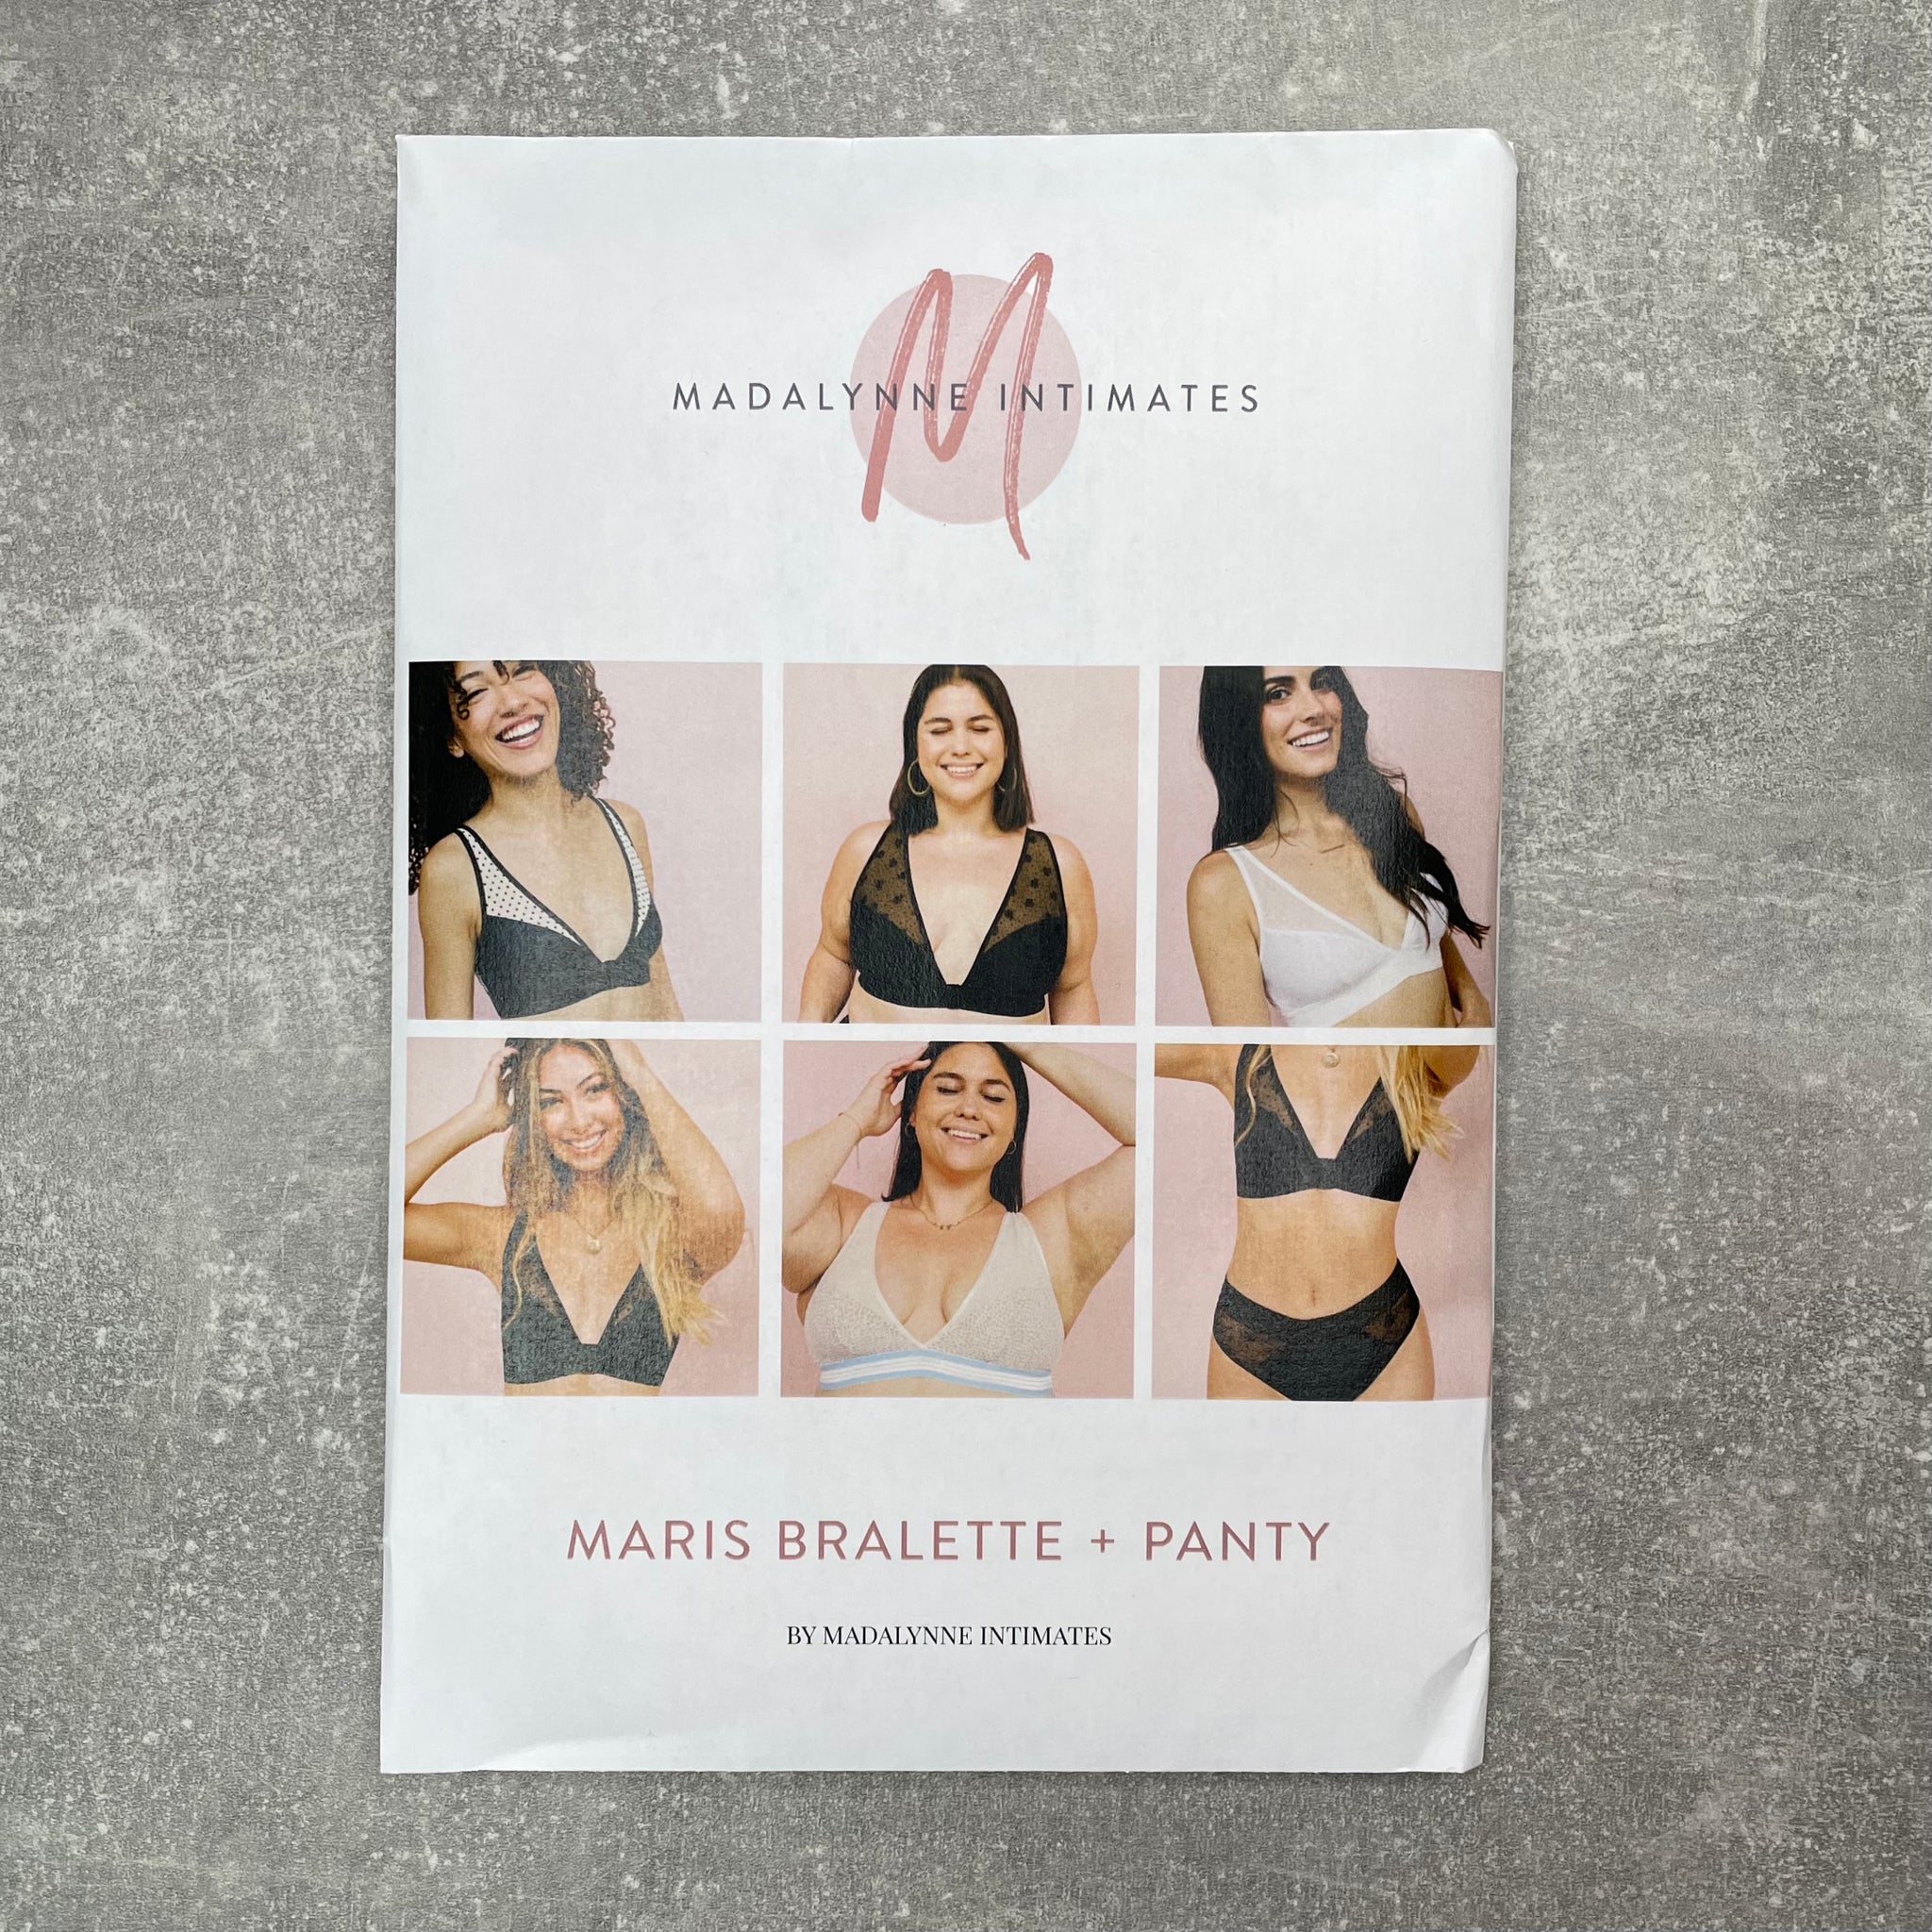 How to Make a Bra with Madalynne Intimates + Lingerie